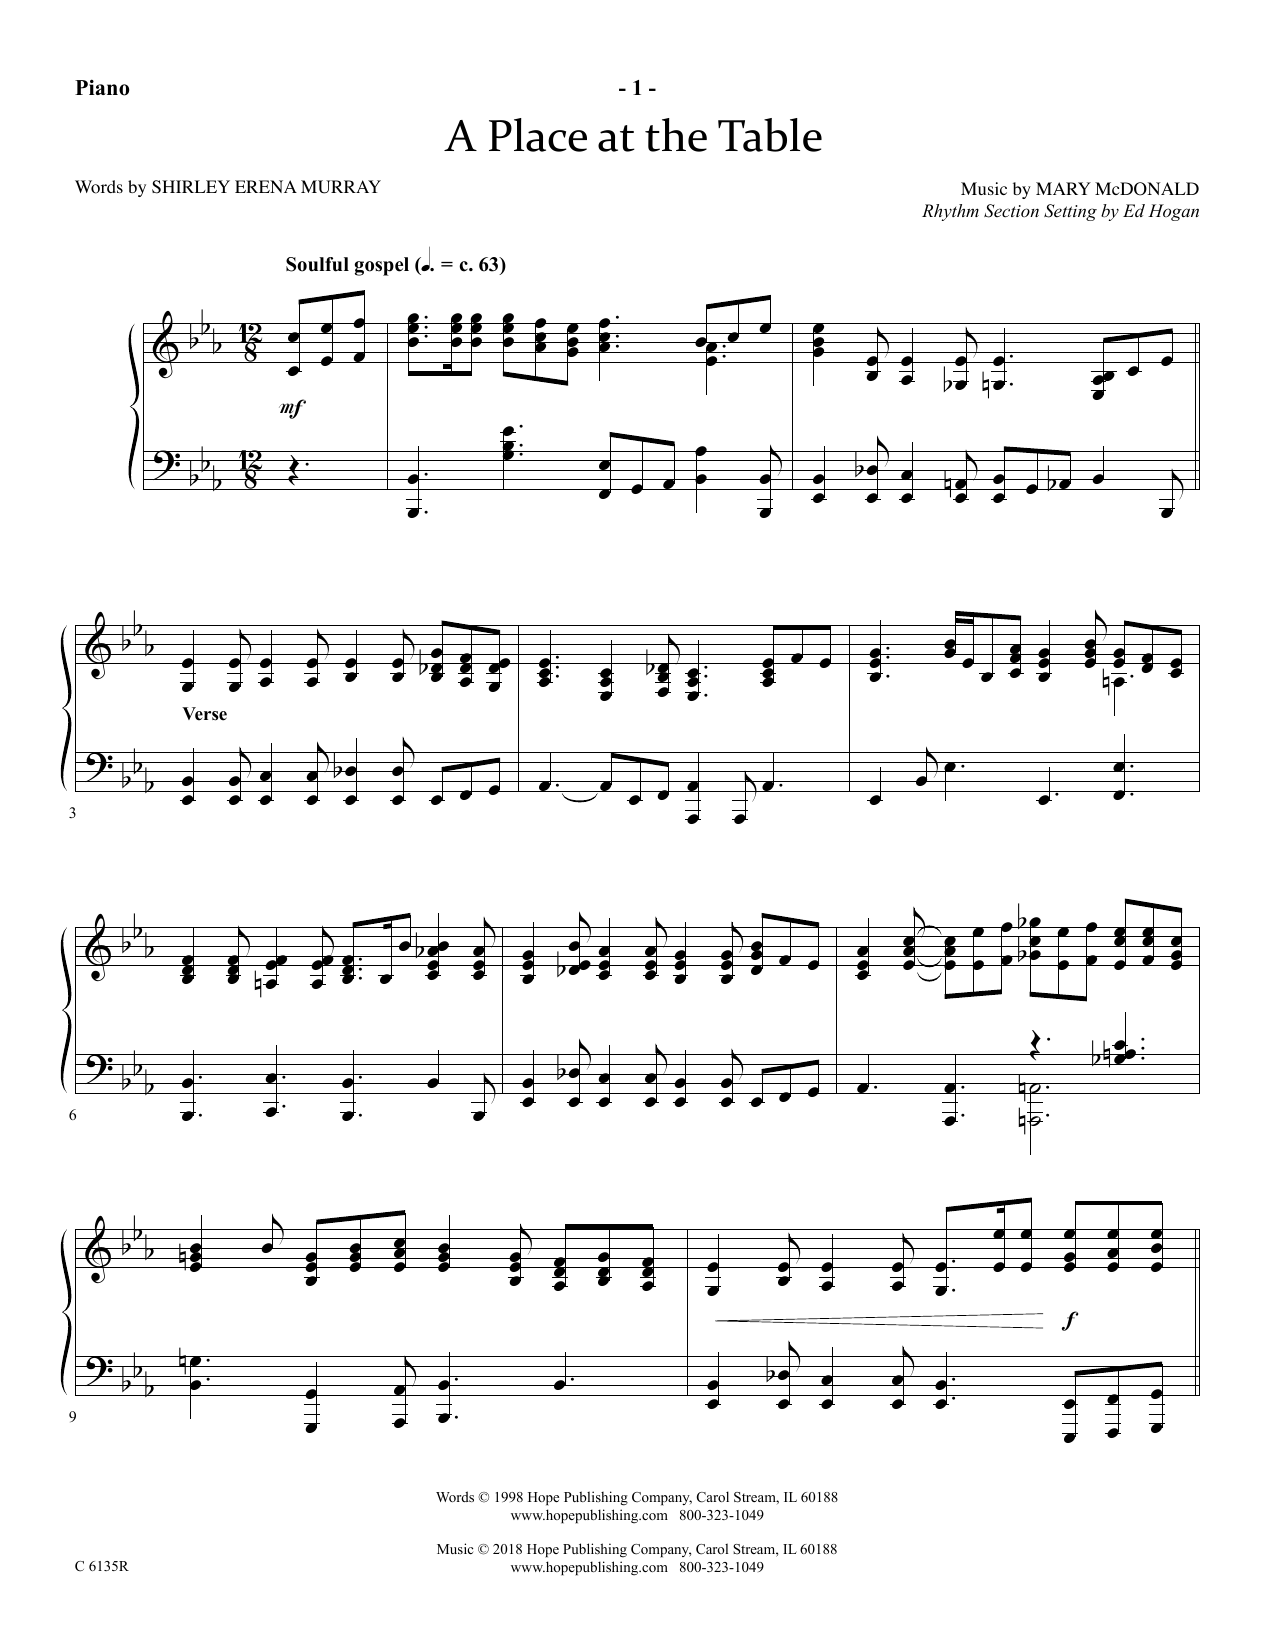 Download Ed Hogan A Place At The Table - Piano Sheet Music